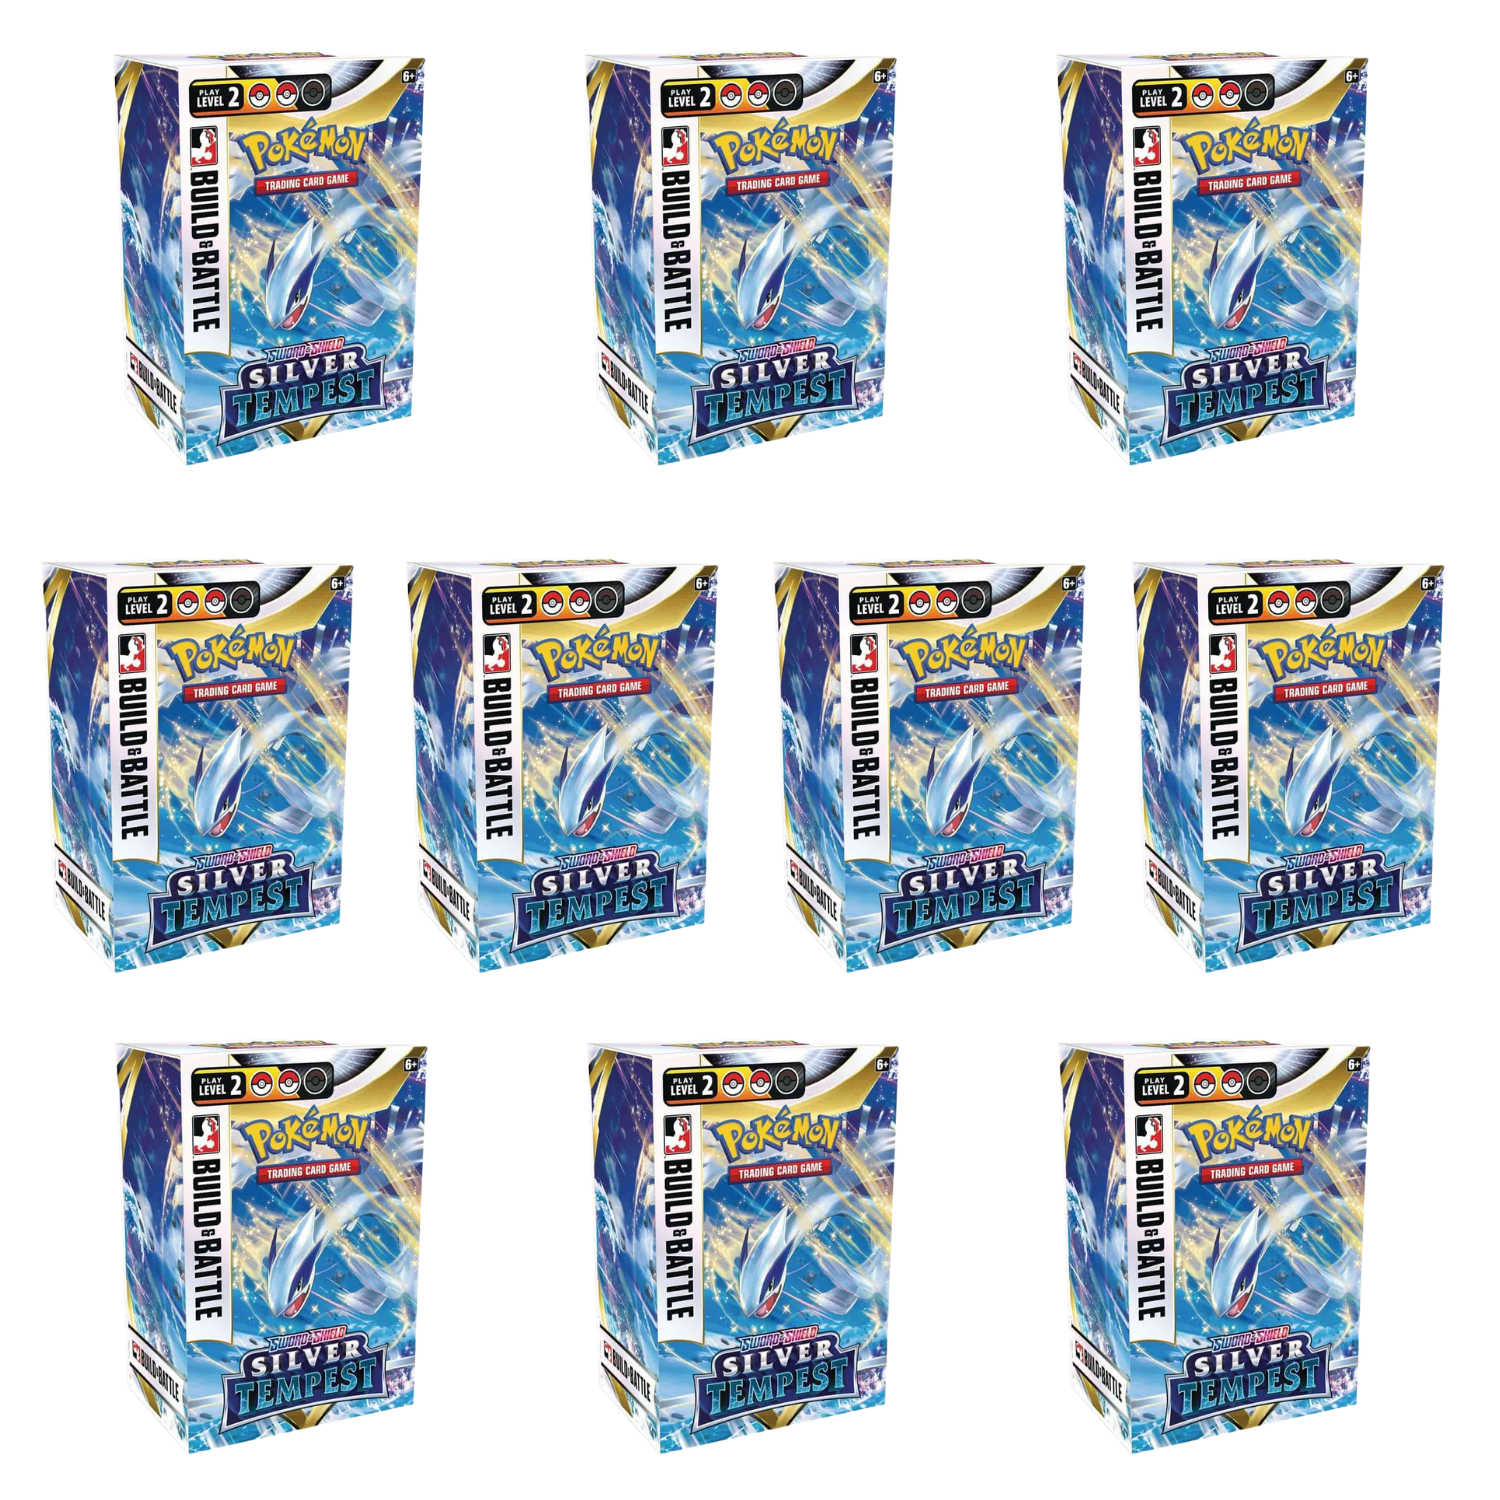 POKEMON TCG: Sword and Shield Silver Tempest Build and Battle Display (10CT Display)